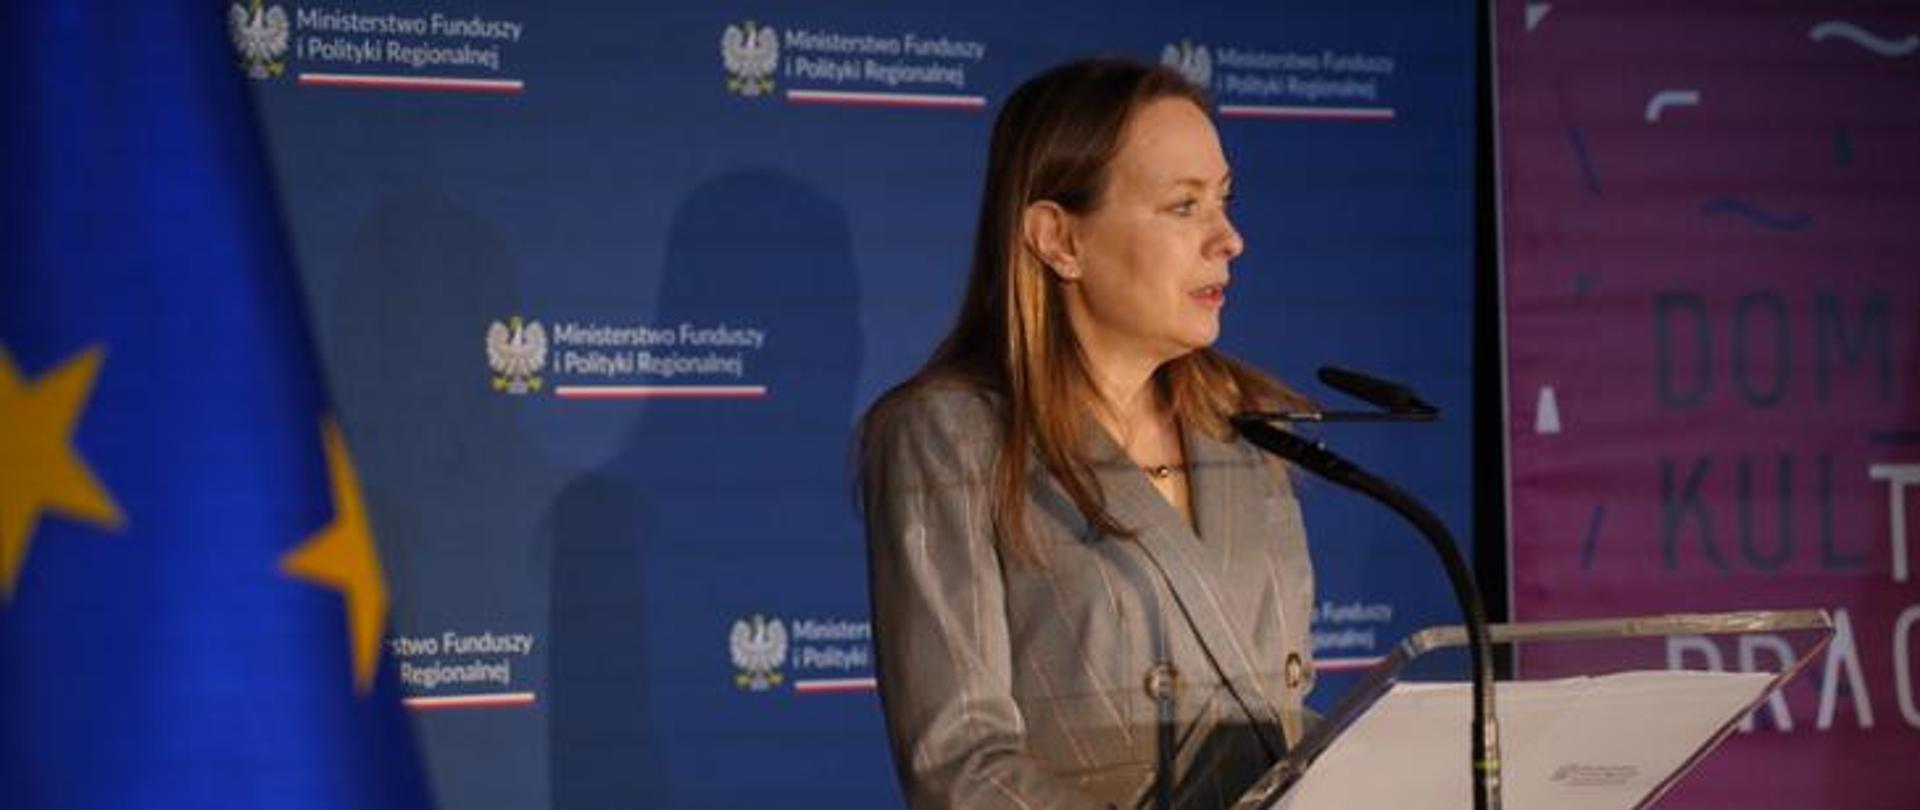 Wygrana Rodzina (Winning Family) competition launched – tackling inherited family poverty